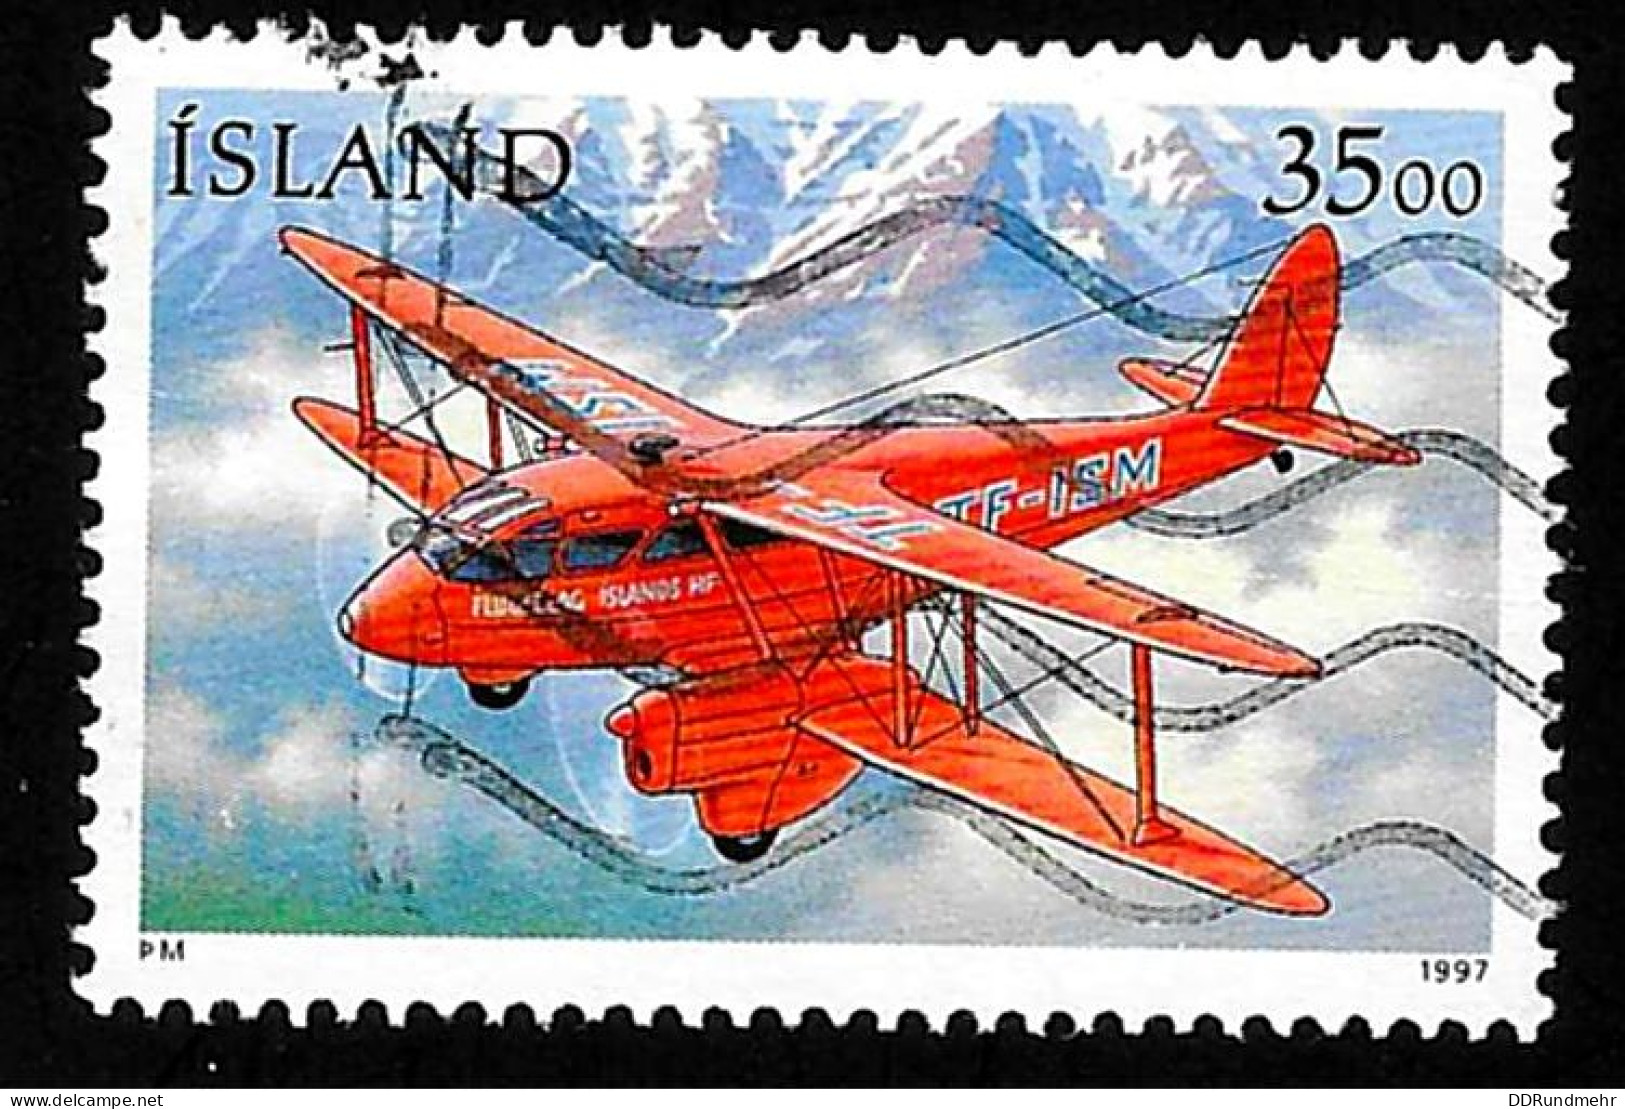 1997 Postal Aircrafts  Michel IS 866 Stamp Number IS 838 Stanley Gibbons IS 879 Used - Usados